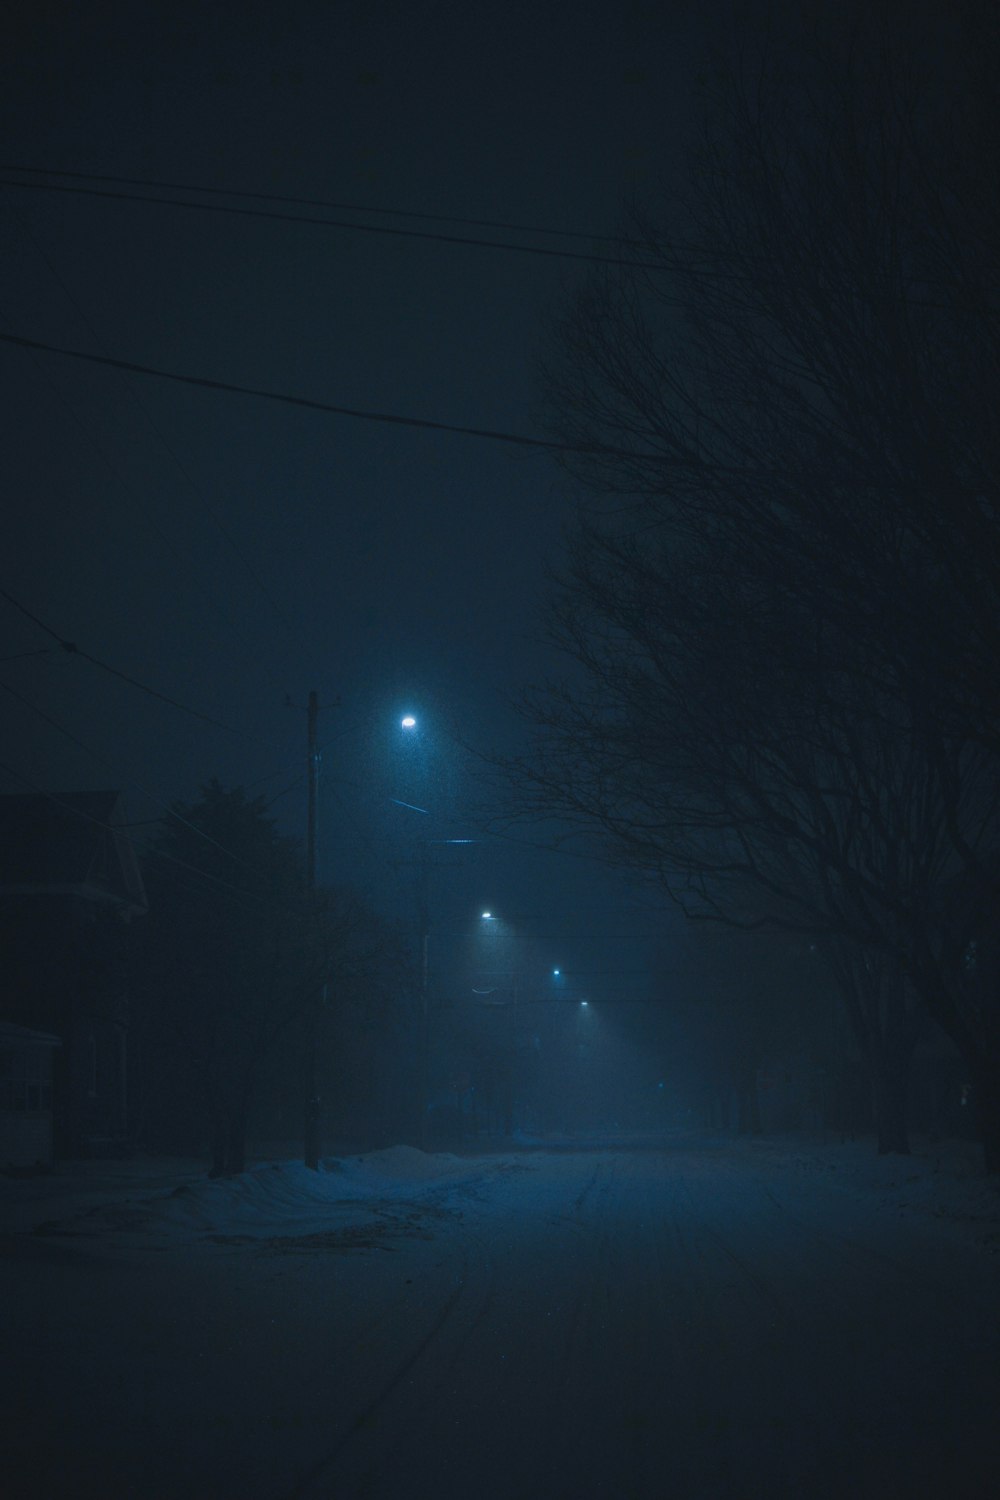 a dark street at night with a street light in the distance